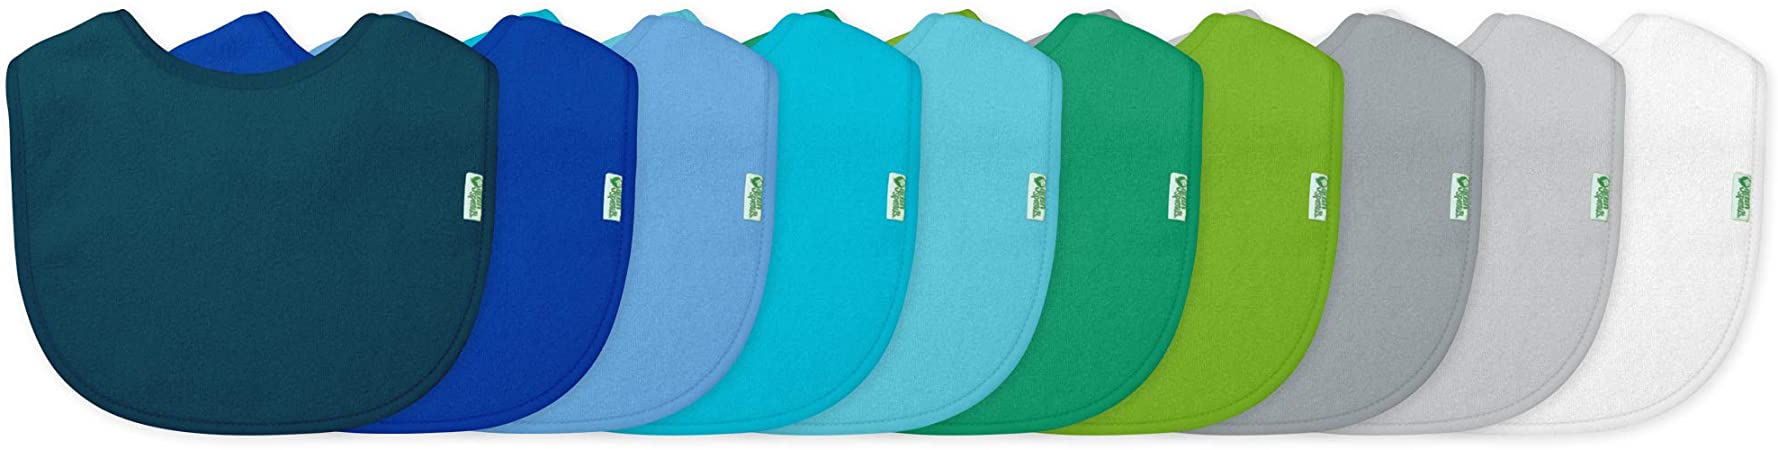 green sprouts Stay-Dry Bibs (10 Pack) | Ultimate Protection from drools & spit ups | Waterproof Protection, Adjustable Hook-&-Loop Closure, Machine Washable